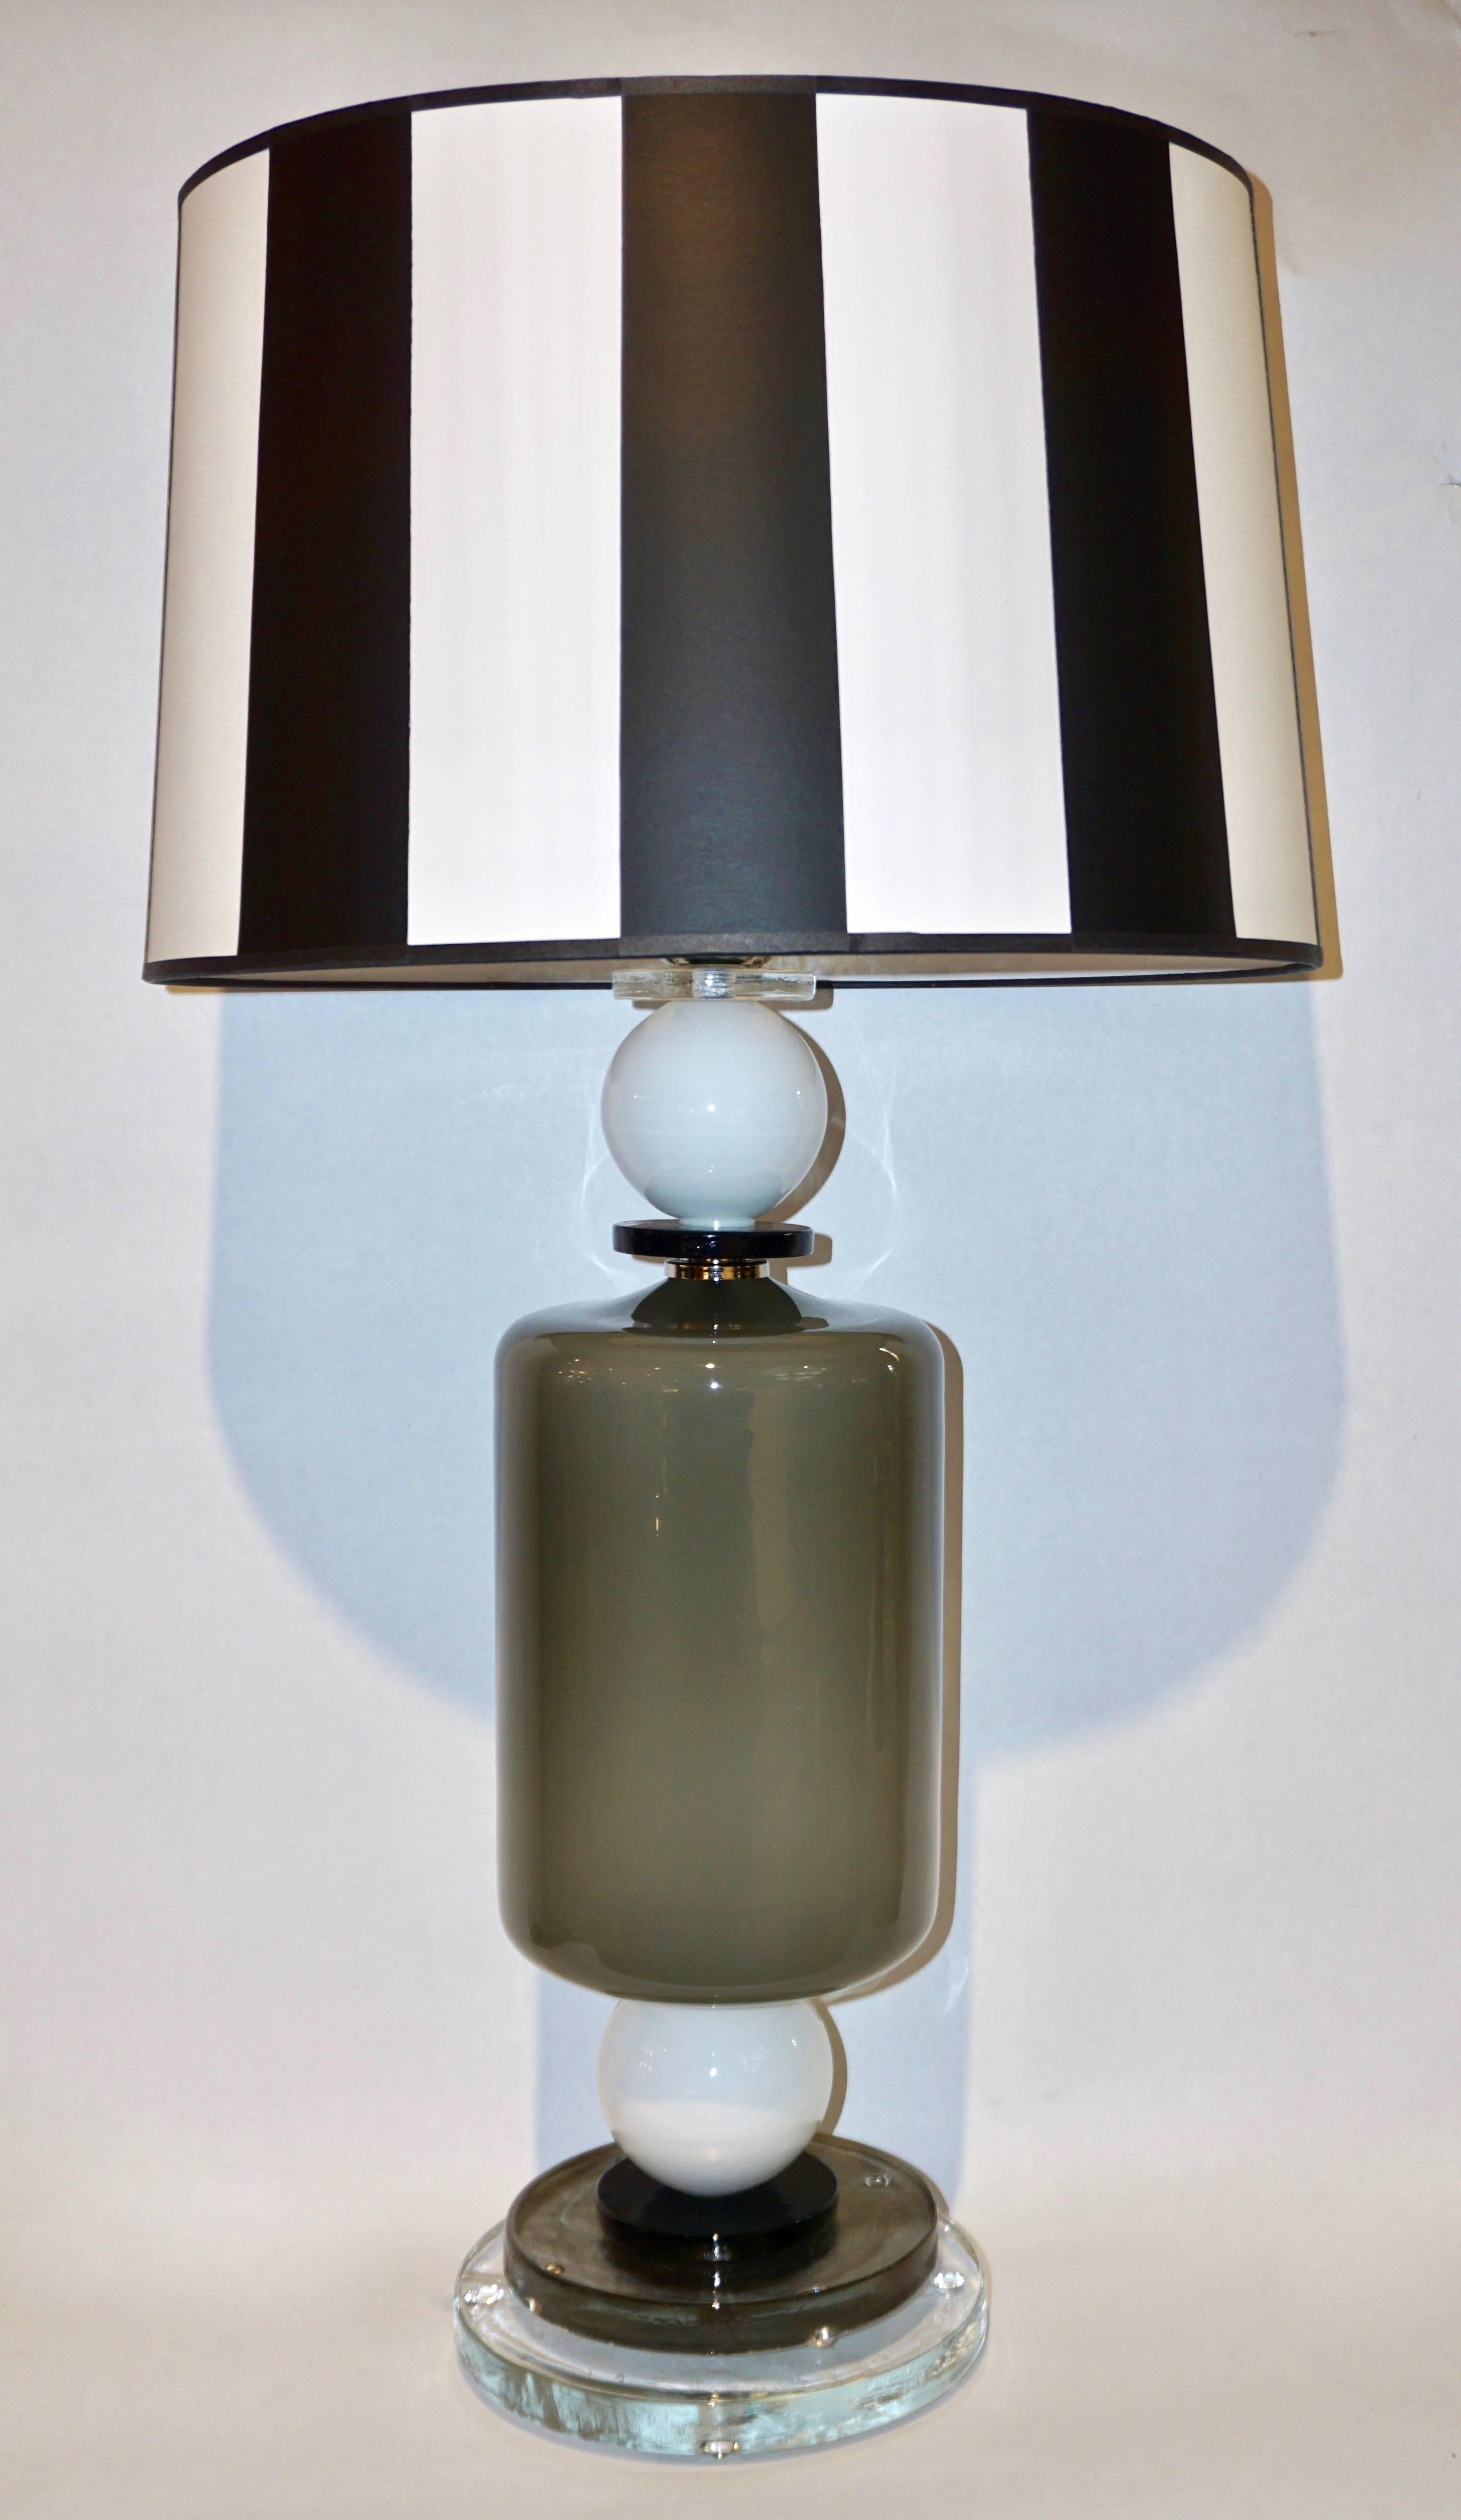 A fine Italian Design pair of modern table lamps of geometric shapes. The central cylindrical body in radiant grey blown Murano glass highlighted with two white spheres and black round accents is supported by a high quality stepped round base,